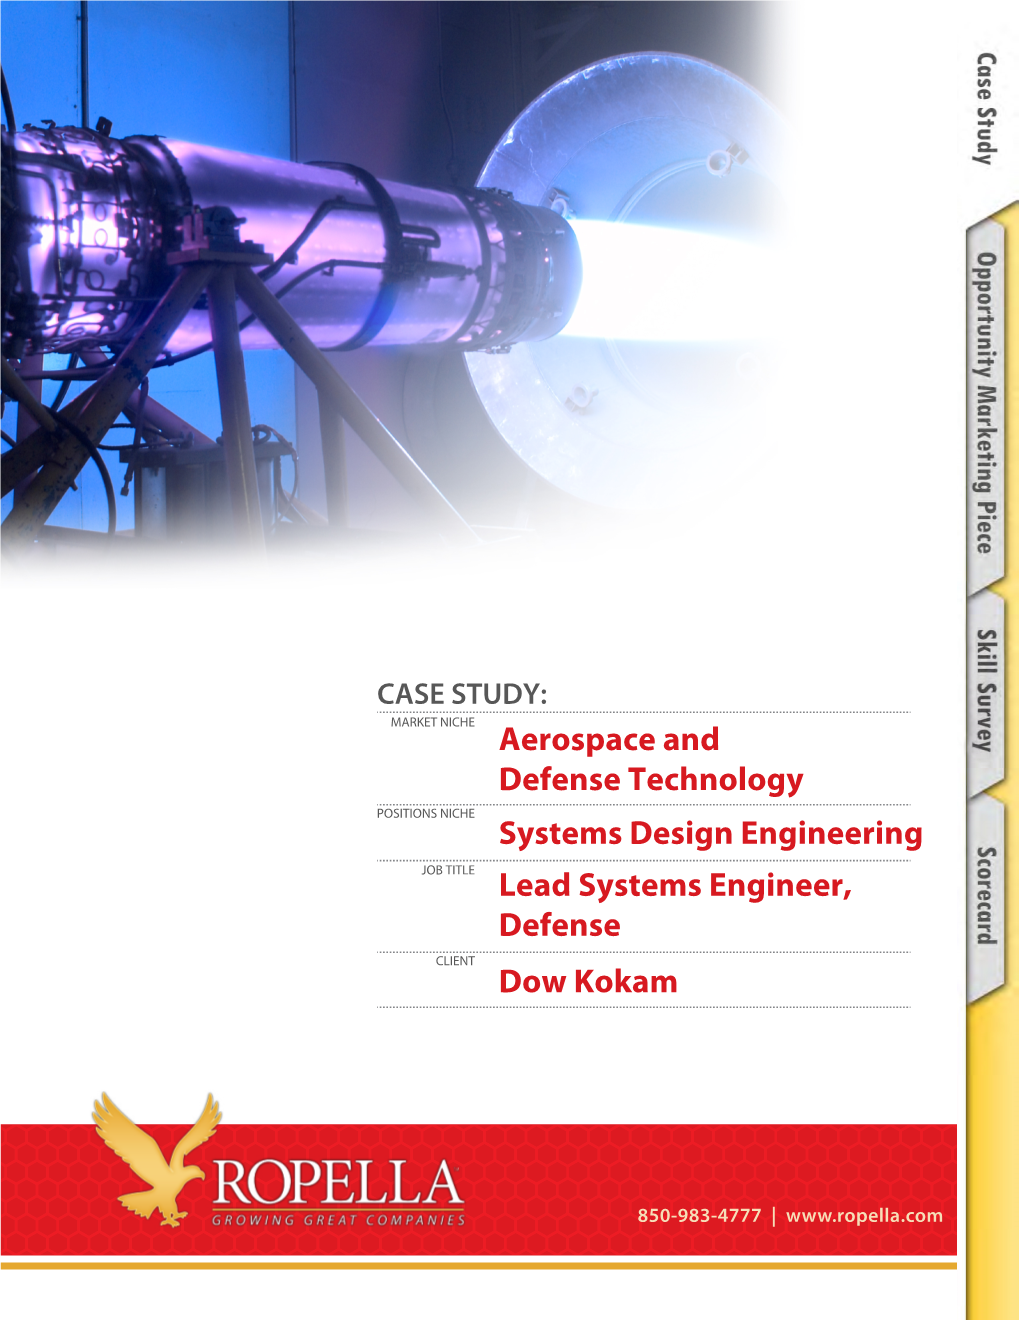 CASE STUDY: MARKET NICHE Aerospace and Defense Technology POSITIONS NICHE Systems Design Engineering JOB TITLE Lead Systems Engineer, Defense CLIENT Dow Kokam